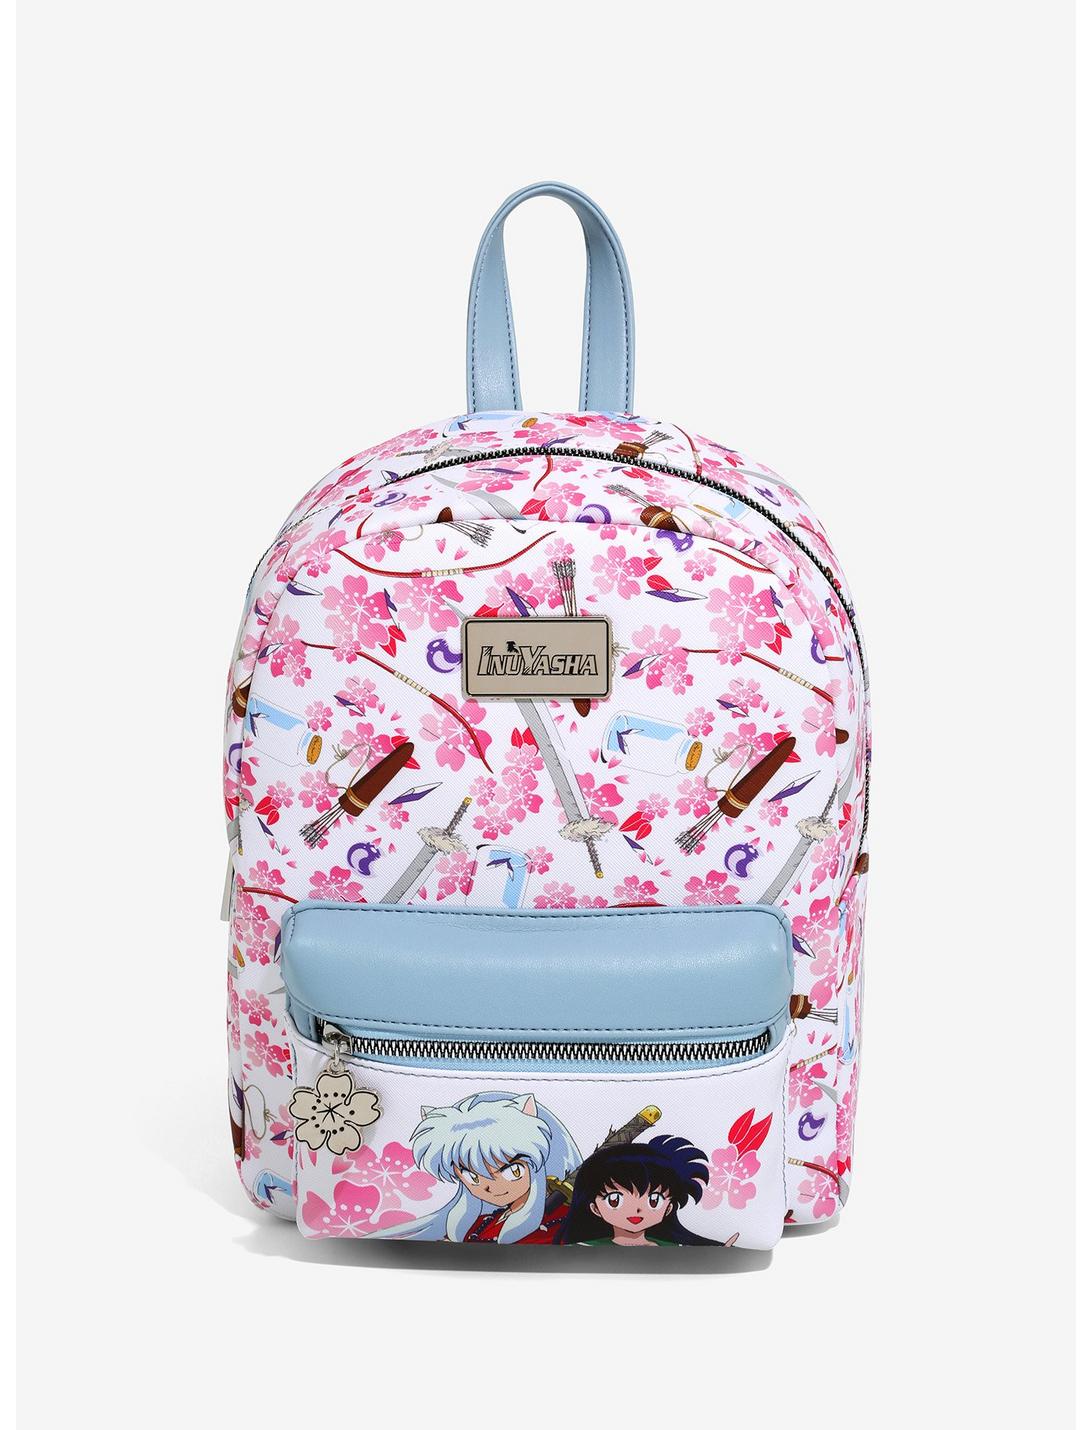 InuYasha Cherry Blossoms & Items Mini Backpack, , hi-res